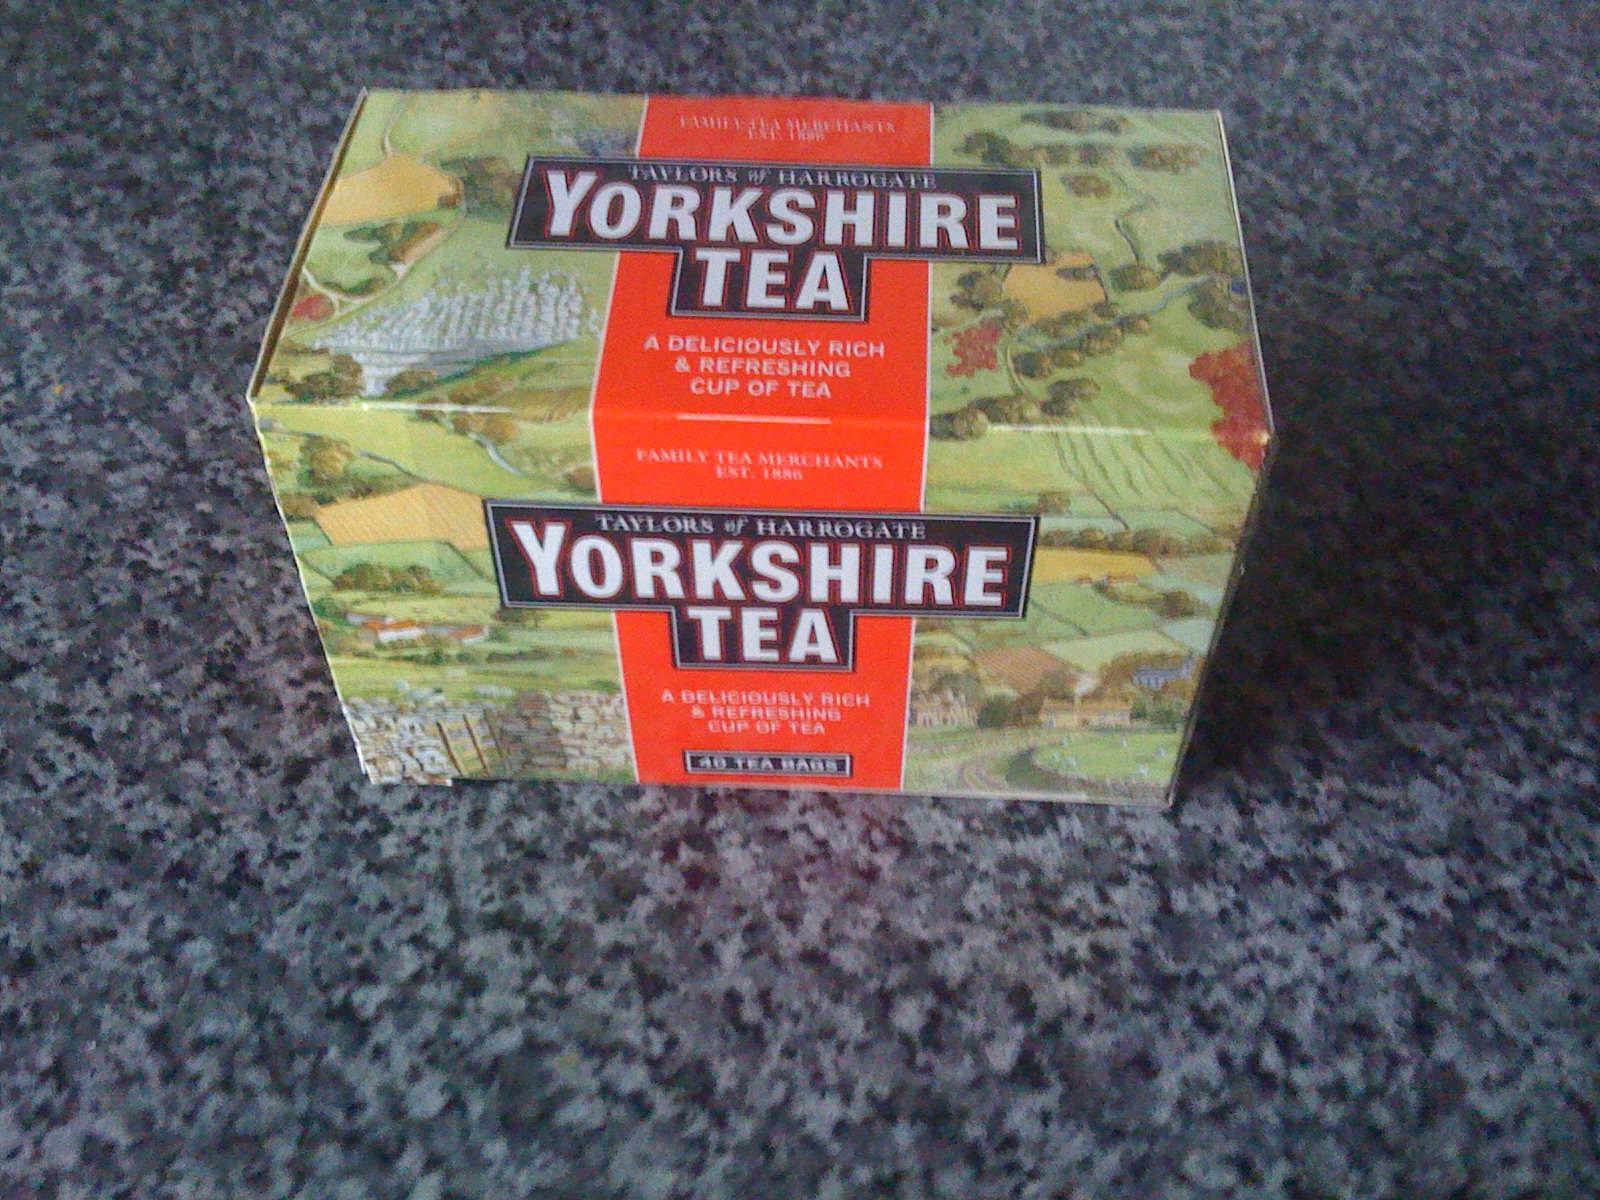 A box of teabags